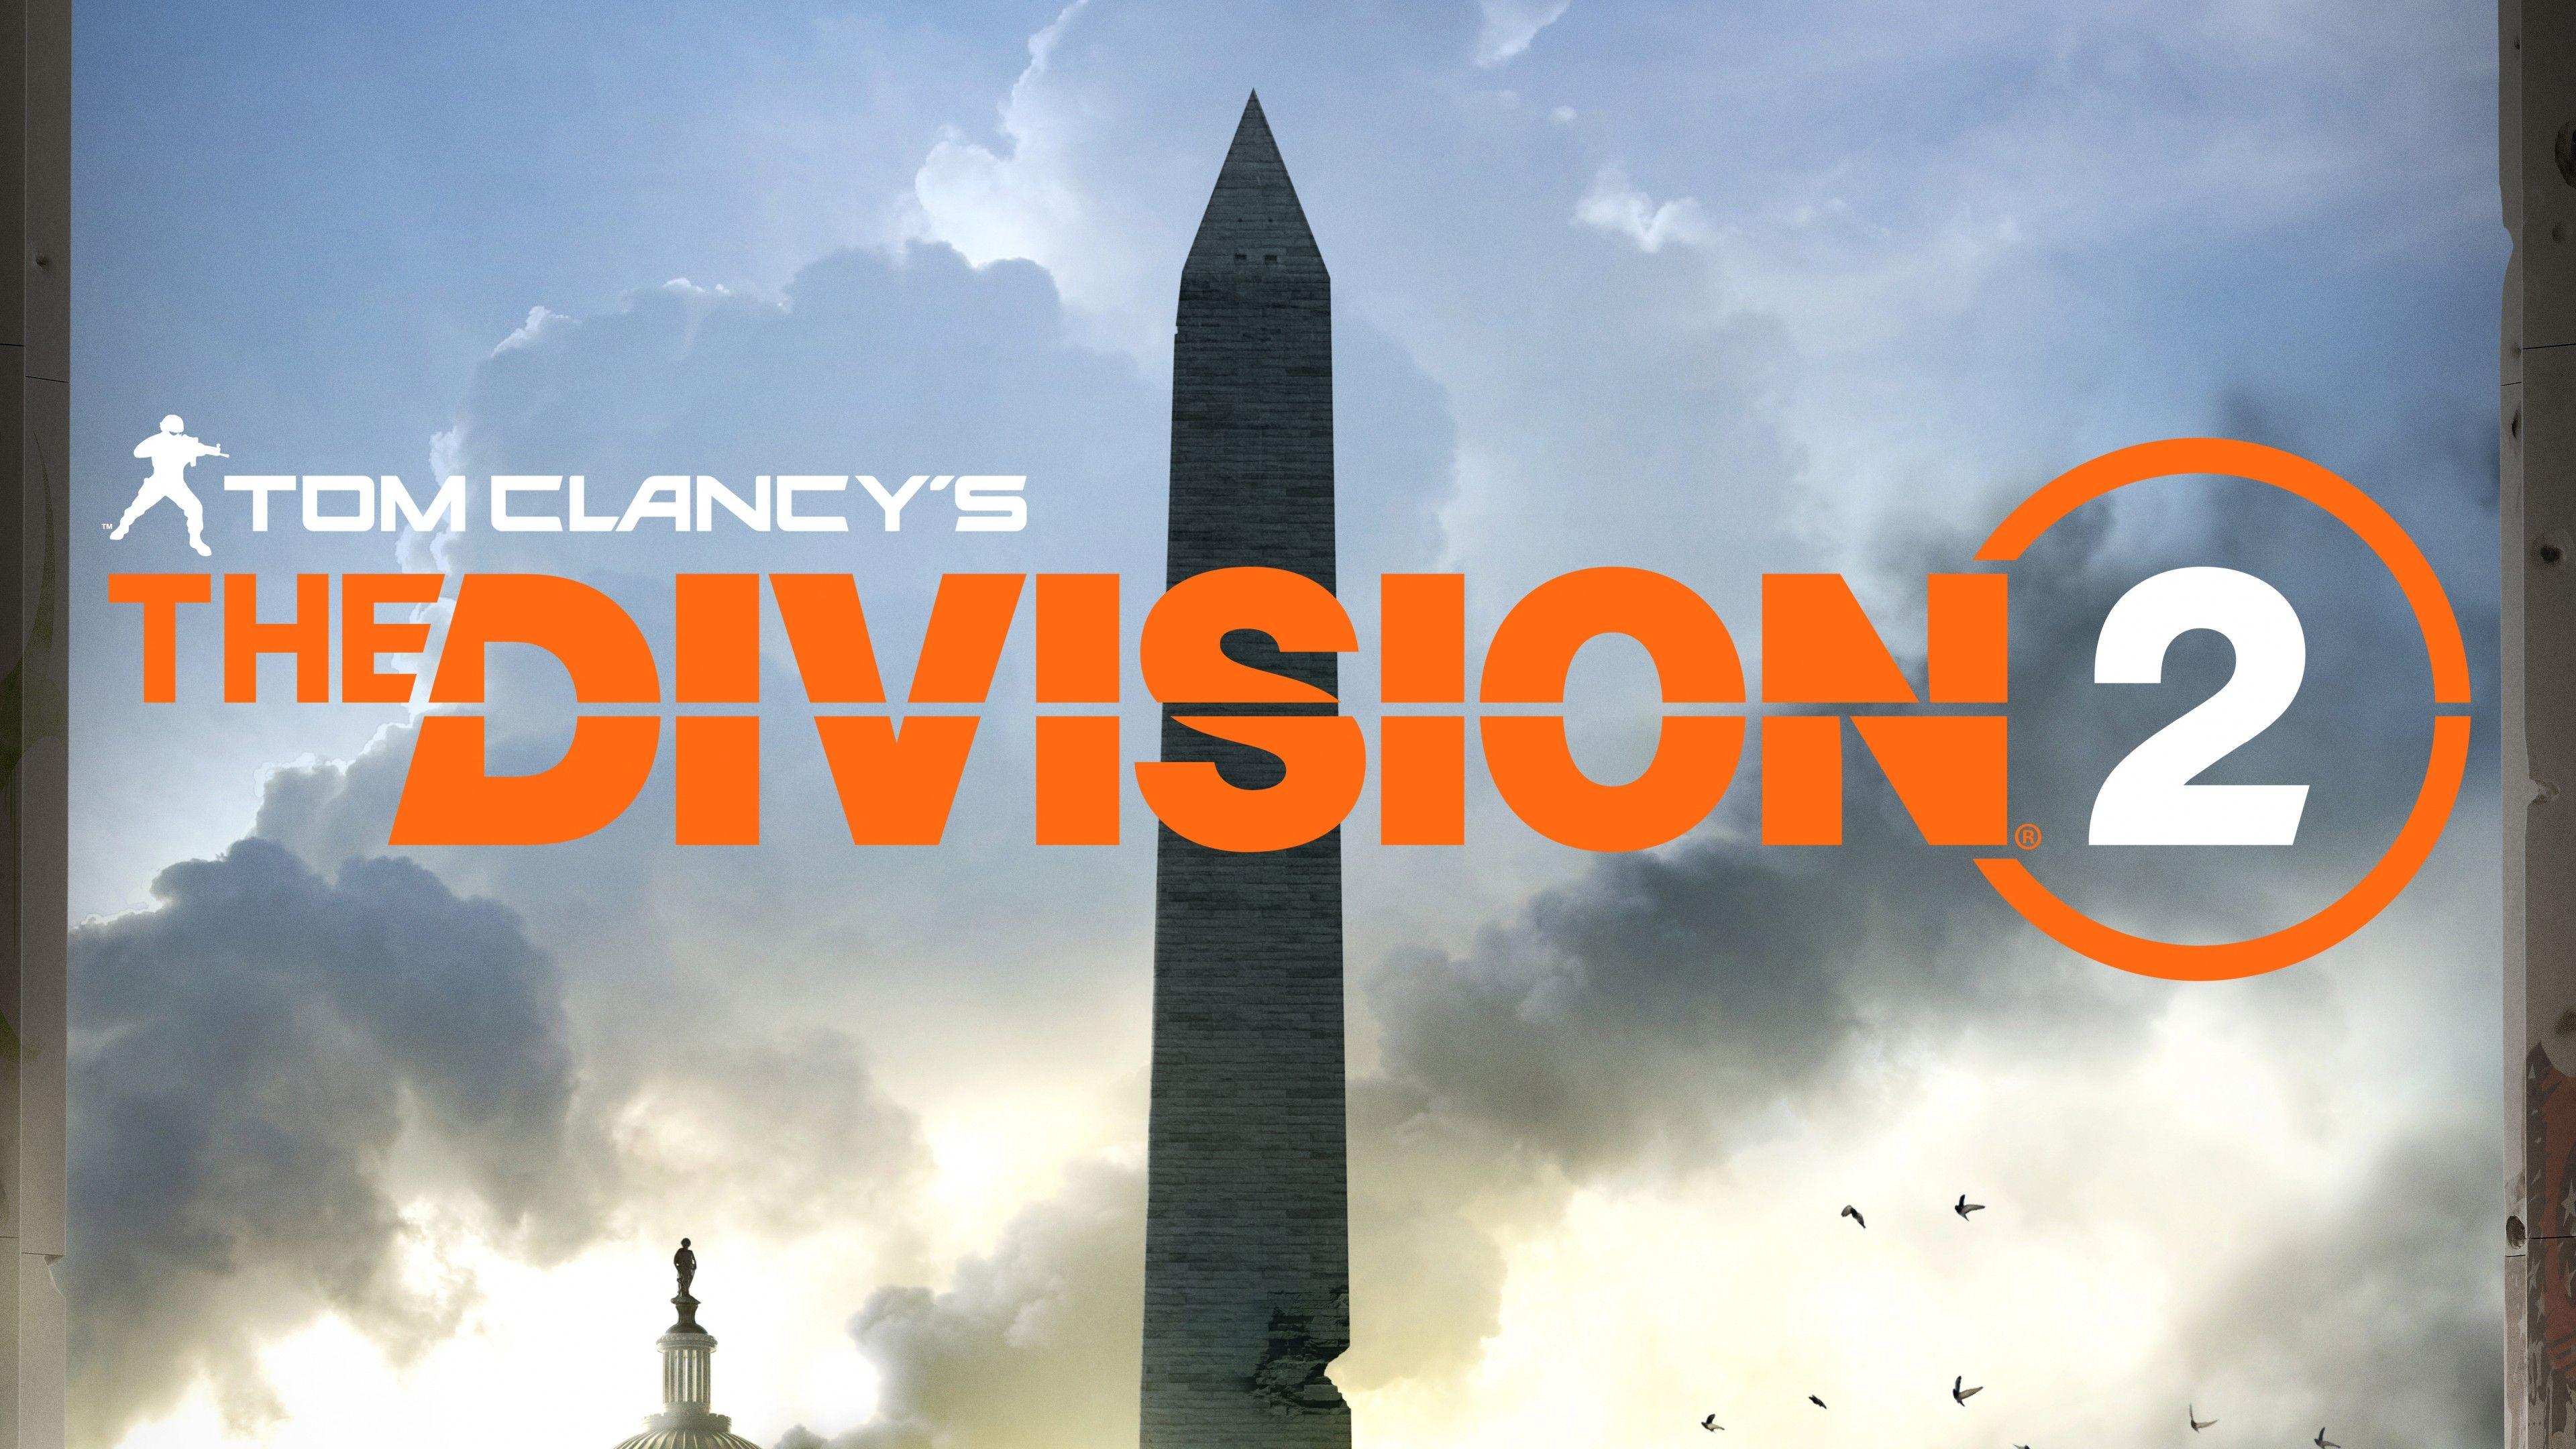 Wallpaper Tom Clancy's The Division E3 poster, 4K, Games